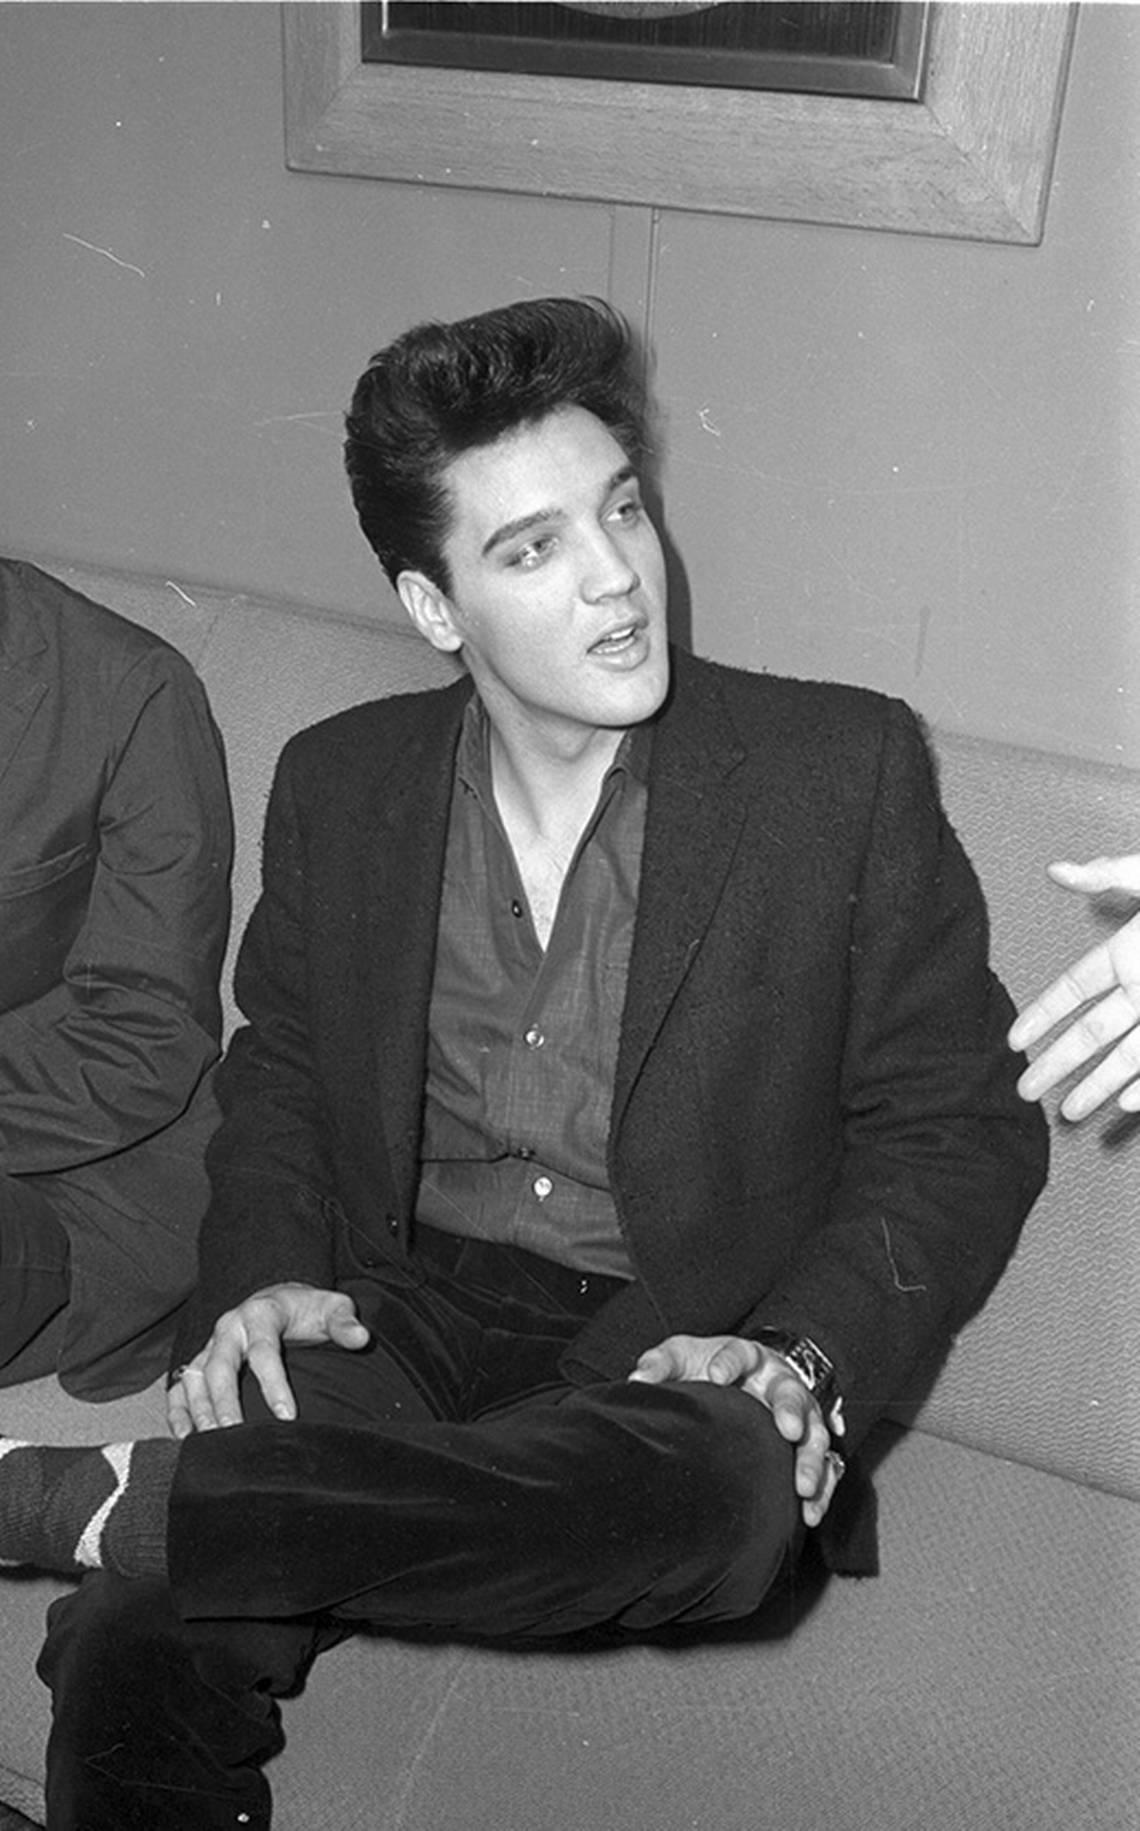 April 19, 1960: Elvis Presley is interviewed at the T&P station in Fort Worth during a layover en route to film “GI Blues” in Hollywood.